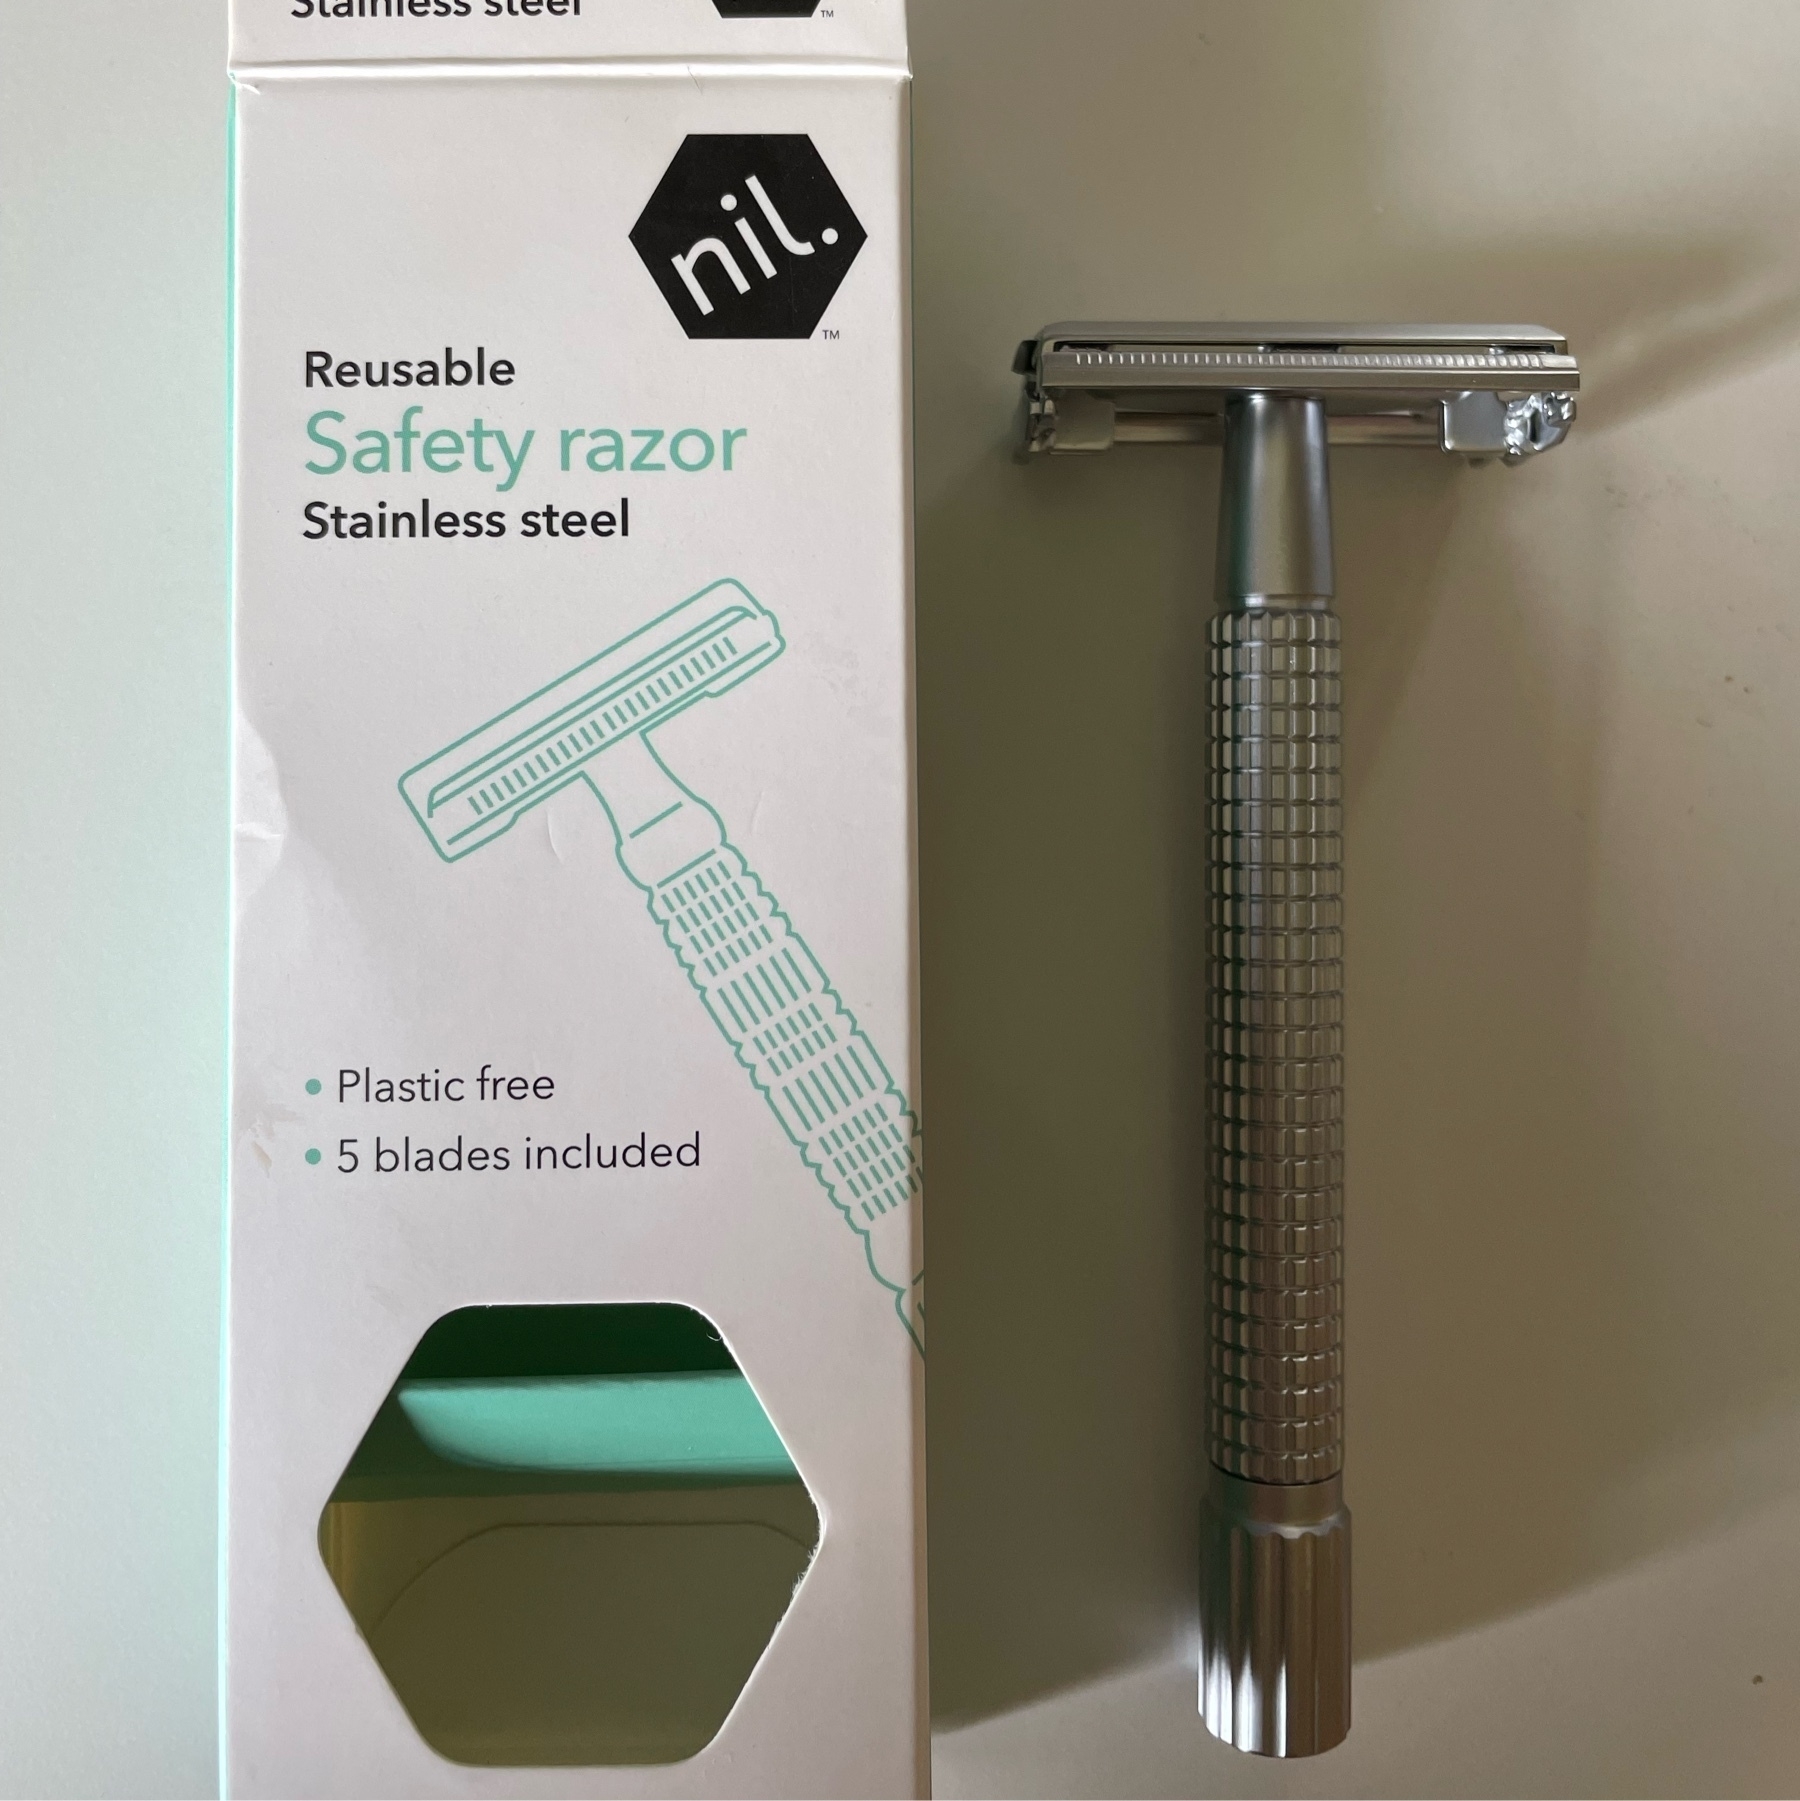 A nil brand safety razor. zero plastic, totally recyclable including the replacement blades.  